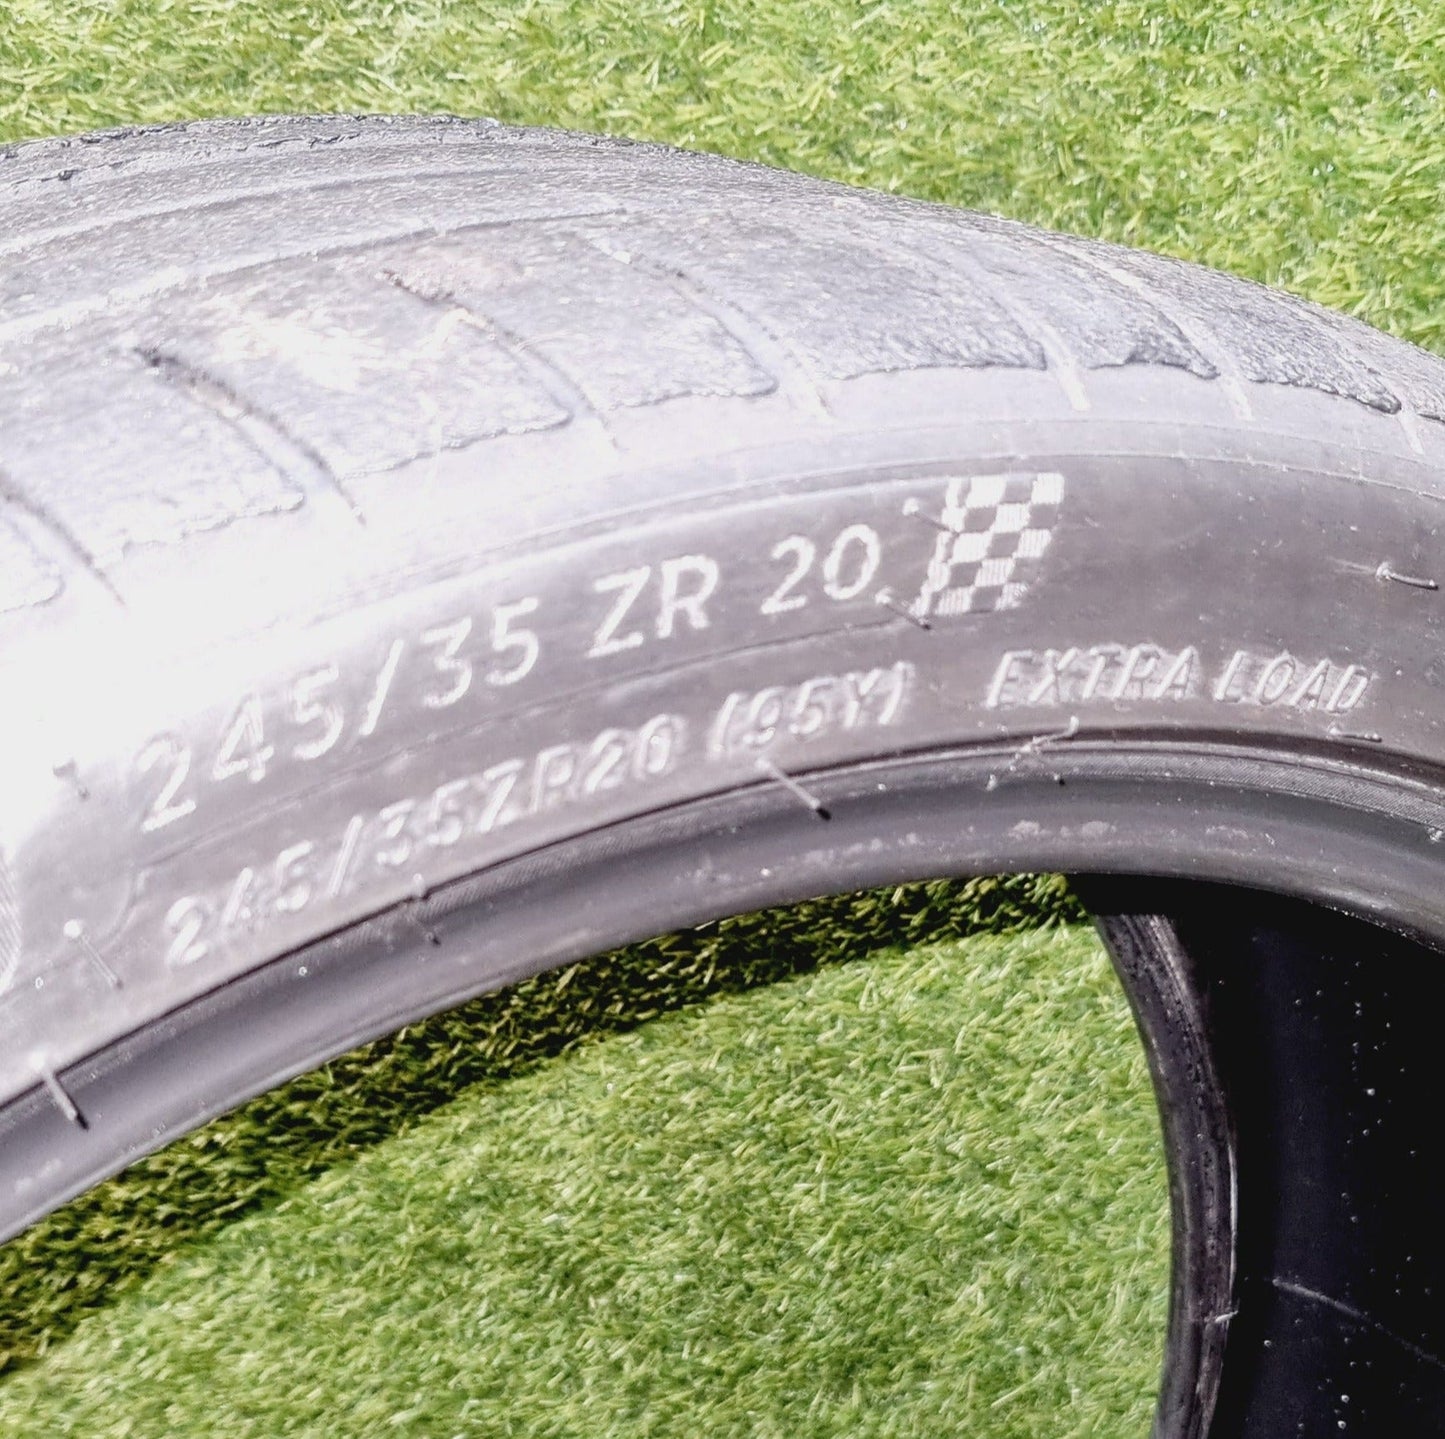 Michelin Pilot 4S 245/35/20 - 5mm tread. Price is per tyre, several available